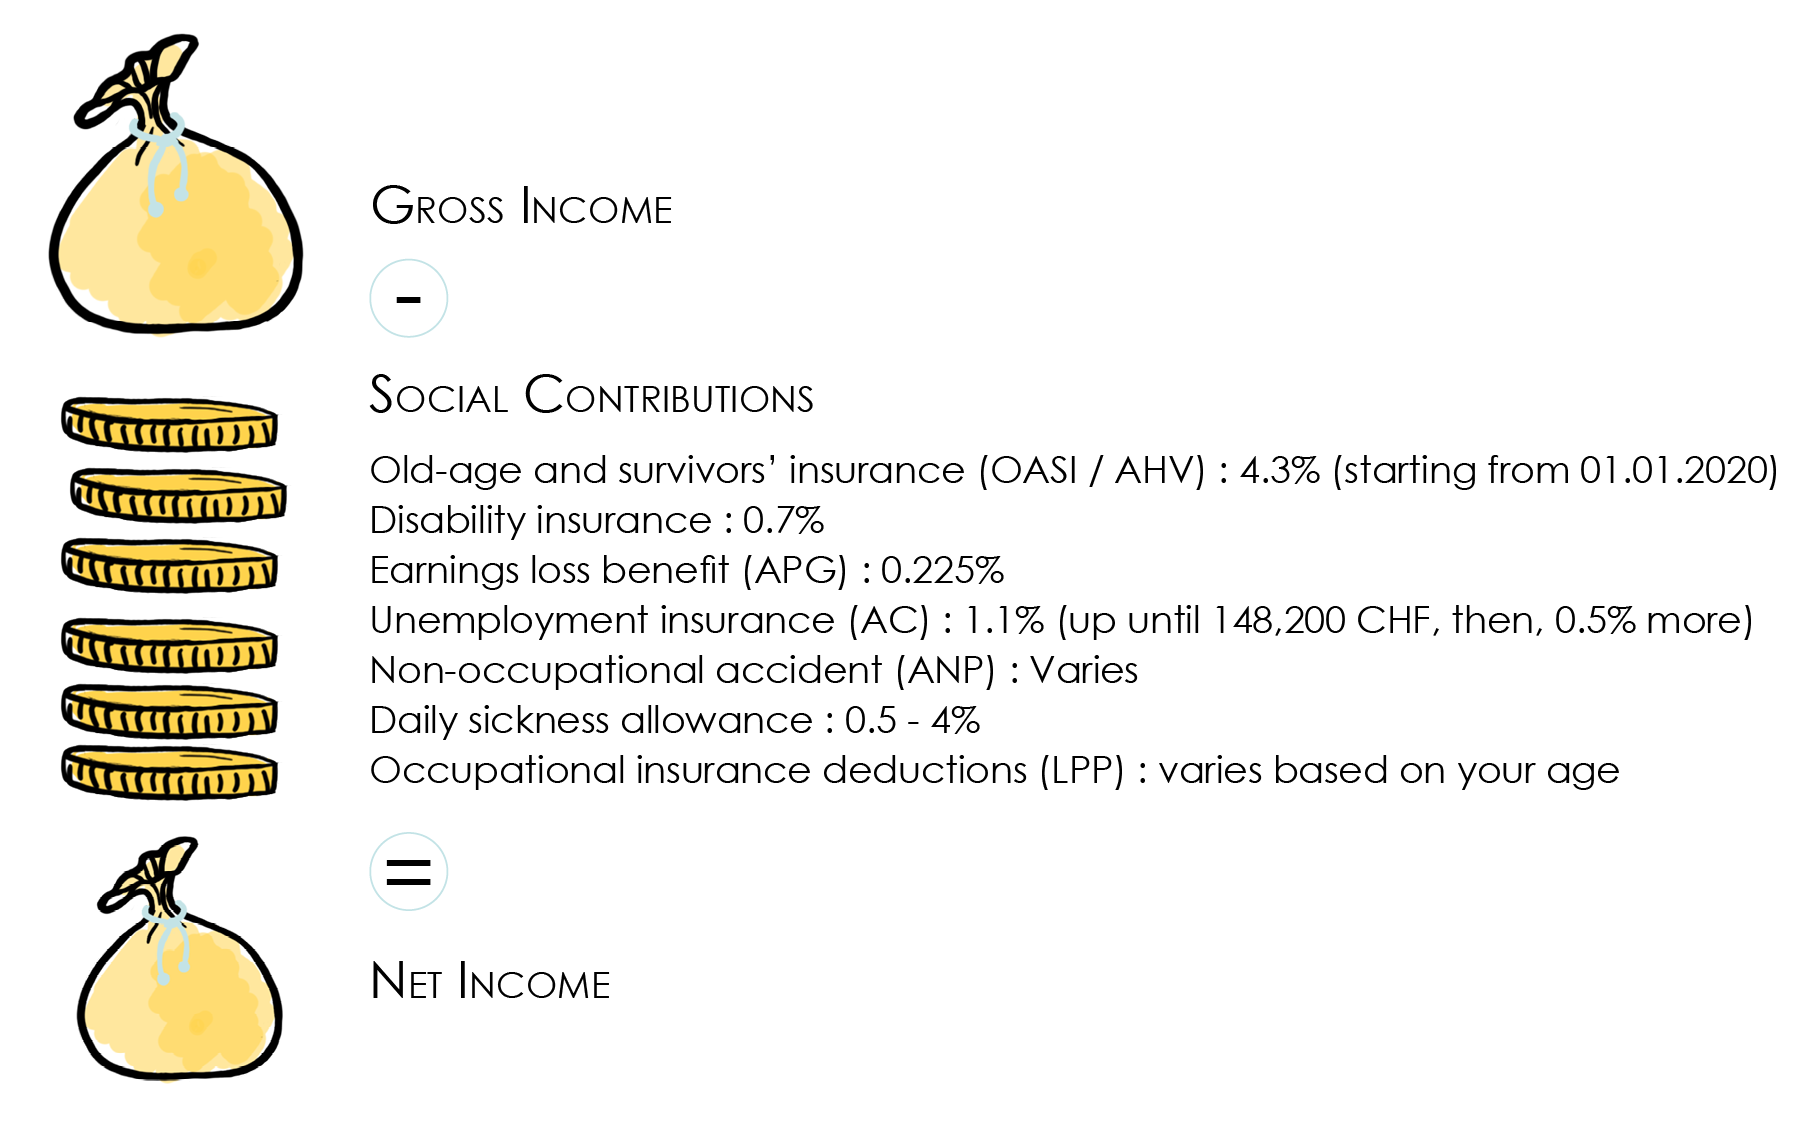 Image summarising the transition from gross to net income by explaining all the social deductions made: AVS, LPP, AC, APG ANP, daily allowance, to determine the taxable income 